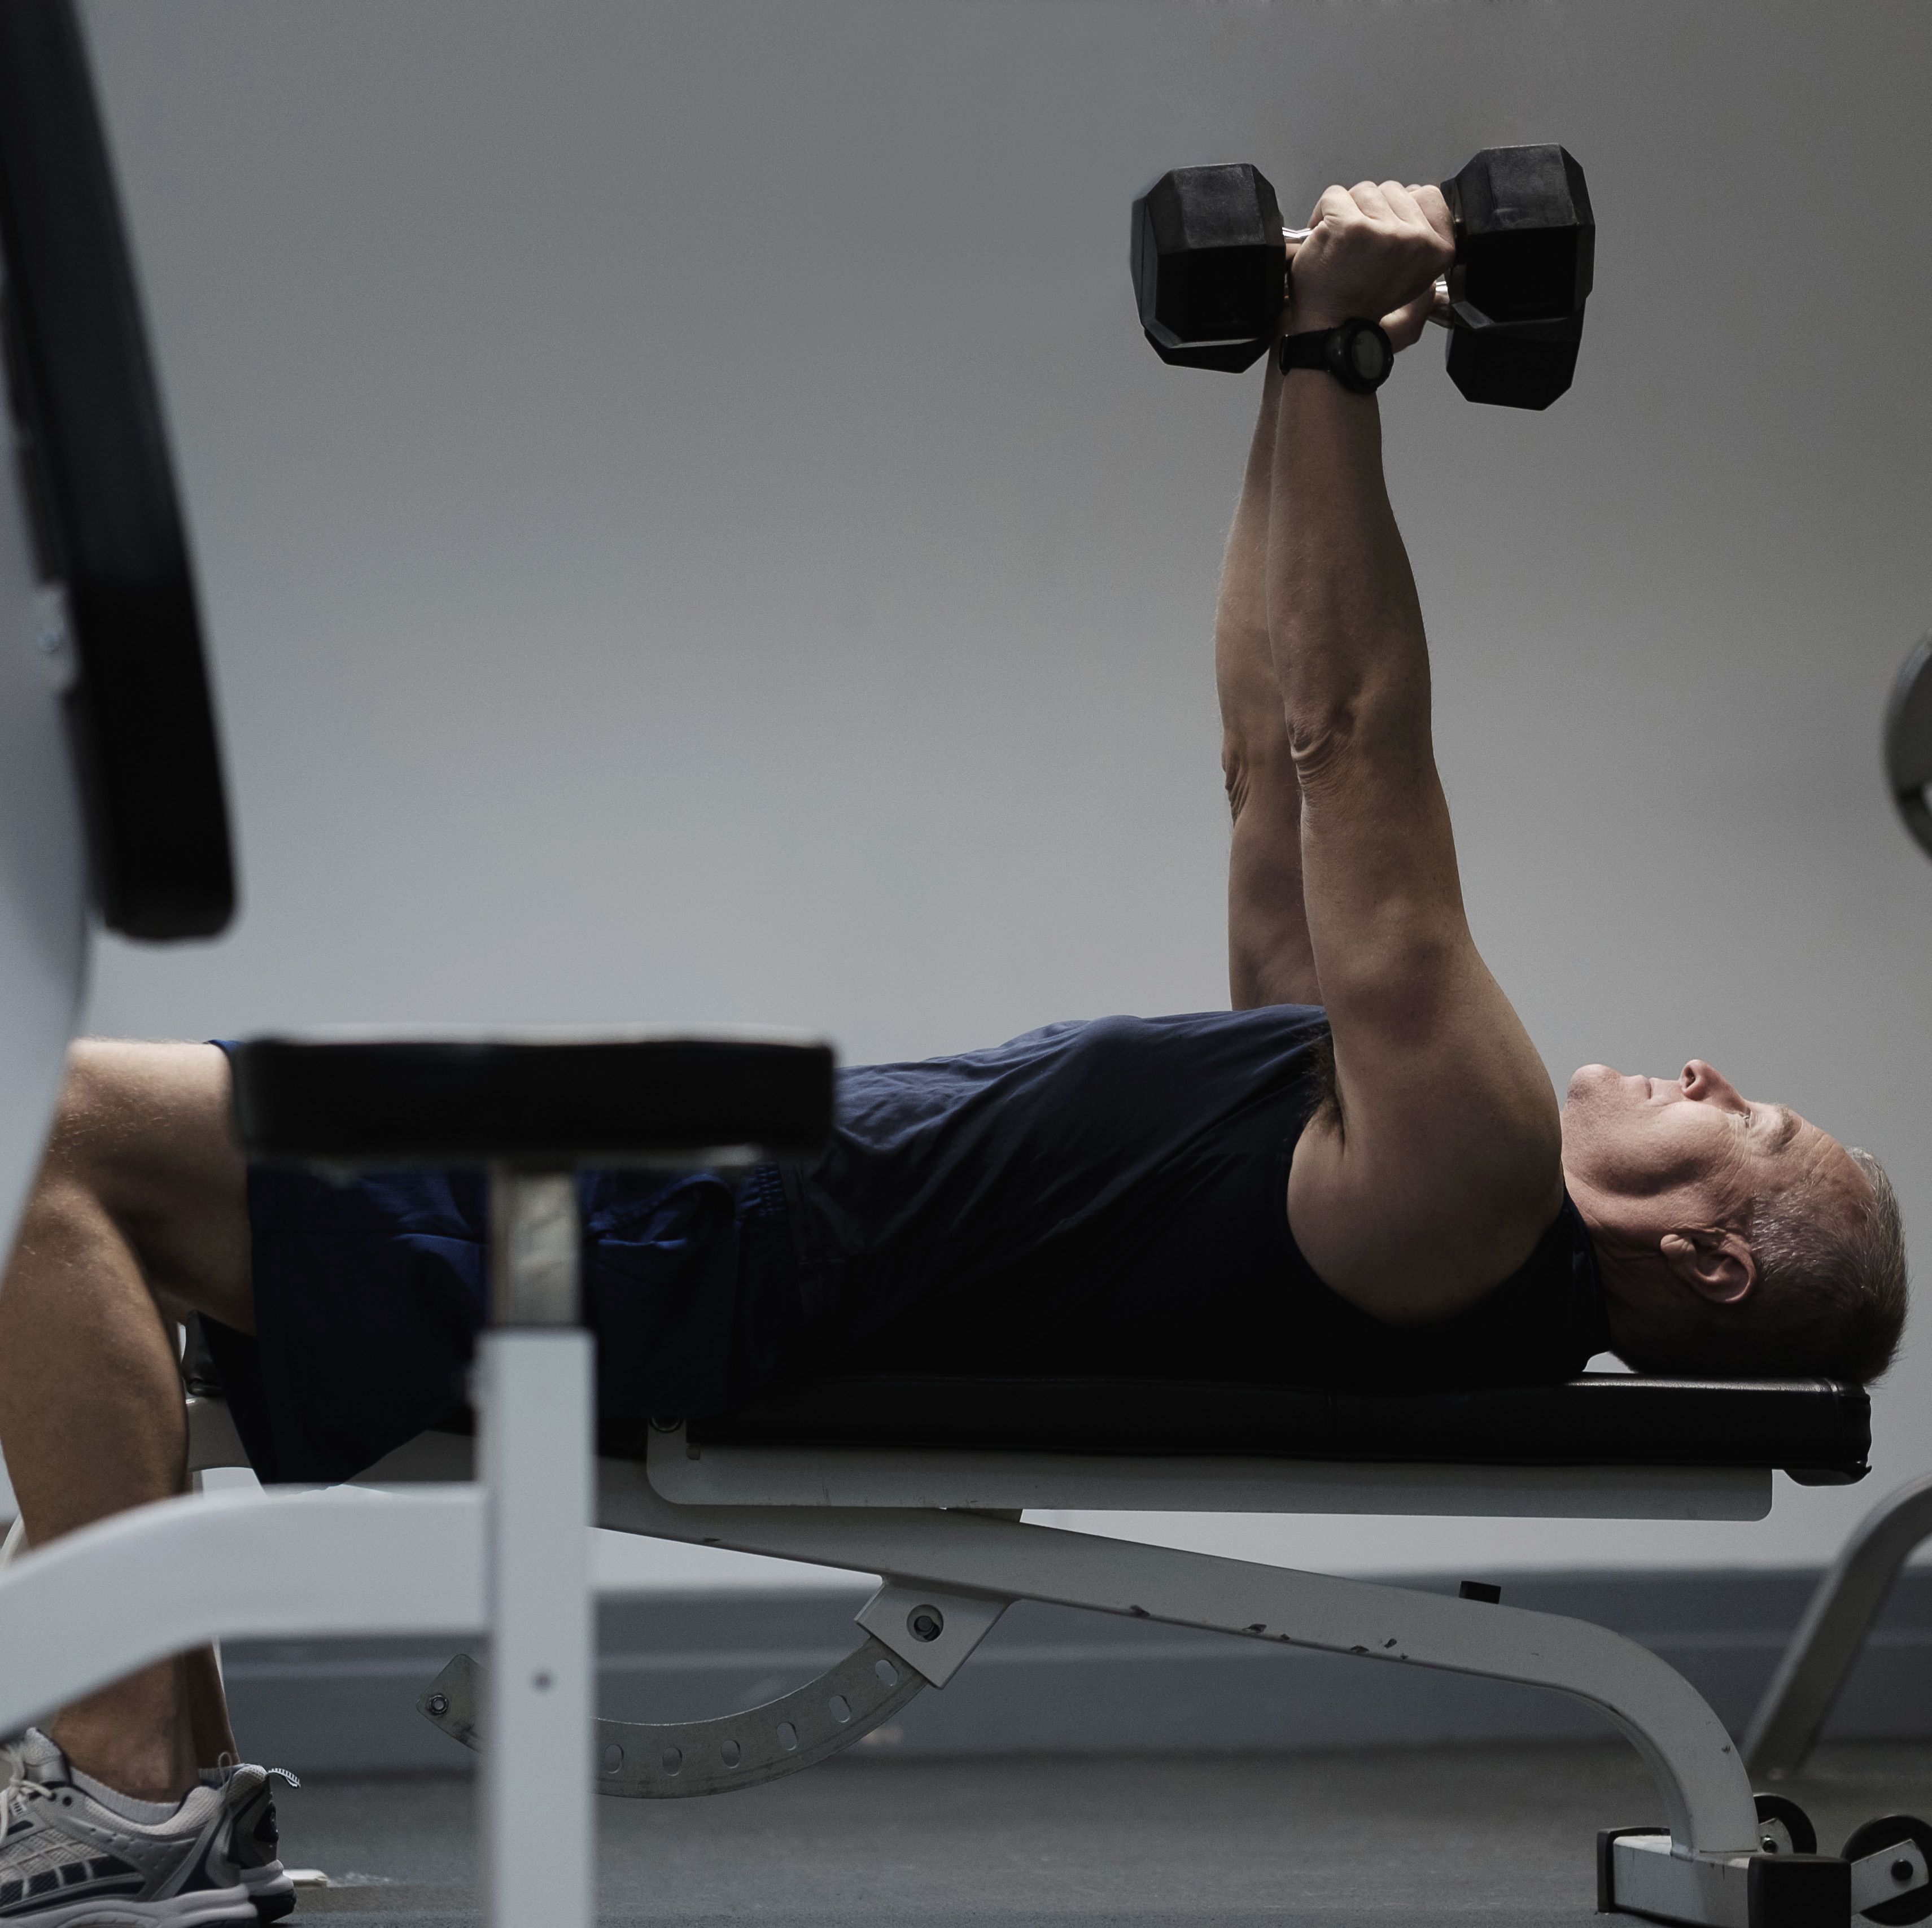 Men Over 40 Can Build Chest Muscle More Safely With This Smart Bench Move